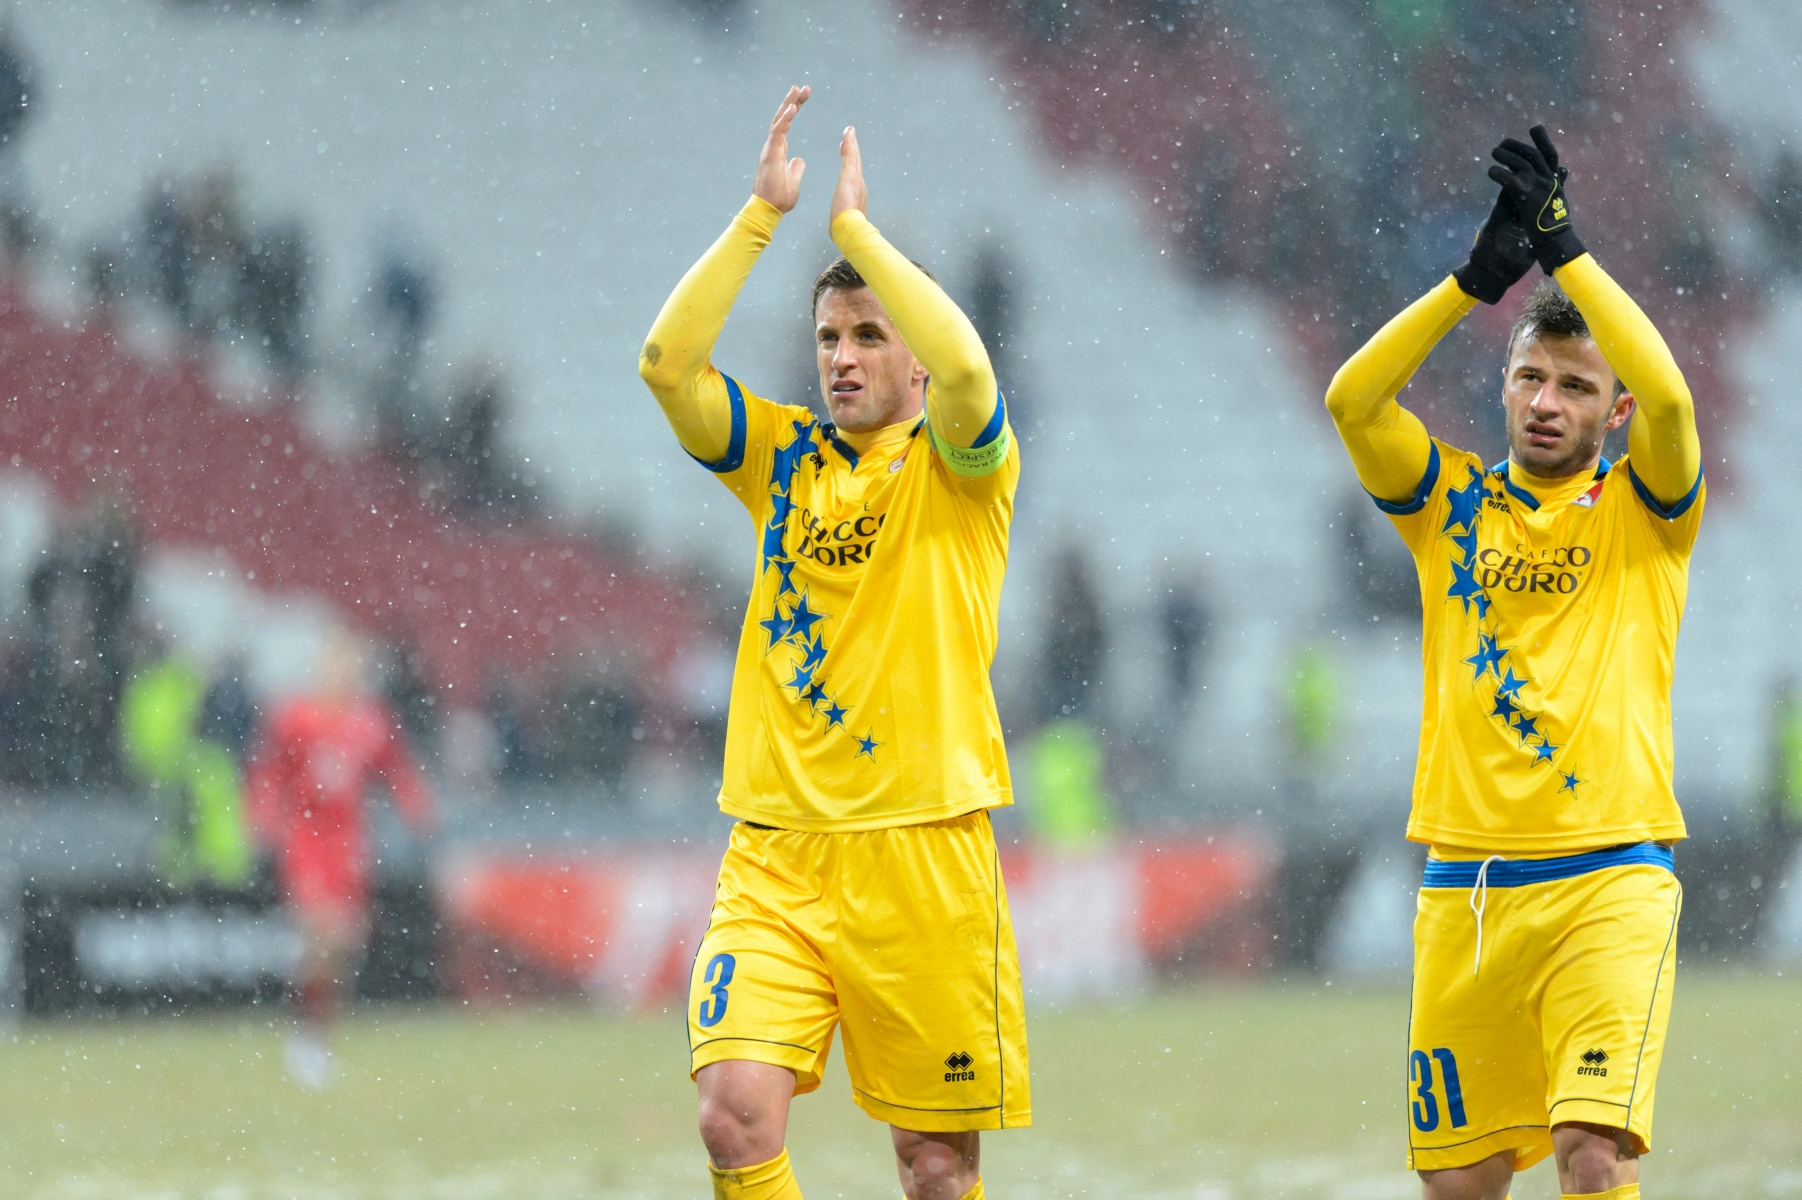 Sion's Reto Ziegler, left, and Sion's Elsad Zverotic, right, look disappointed after losing the UEFA Europa League group B soccer match between Rubin Kazan and FC Sion at the Kazan Arena stadium, in Kazan, Russia, Thursday, November 26, 2015. (KEYSTONE/Laurent Gillieron) RUSSIA SOCCER EUROPA LEAGUE KAZAN SION